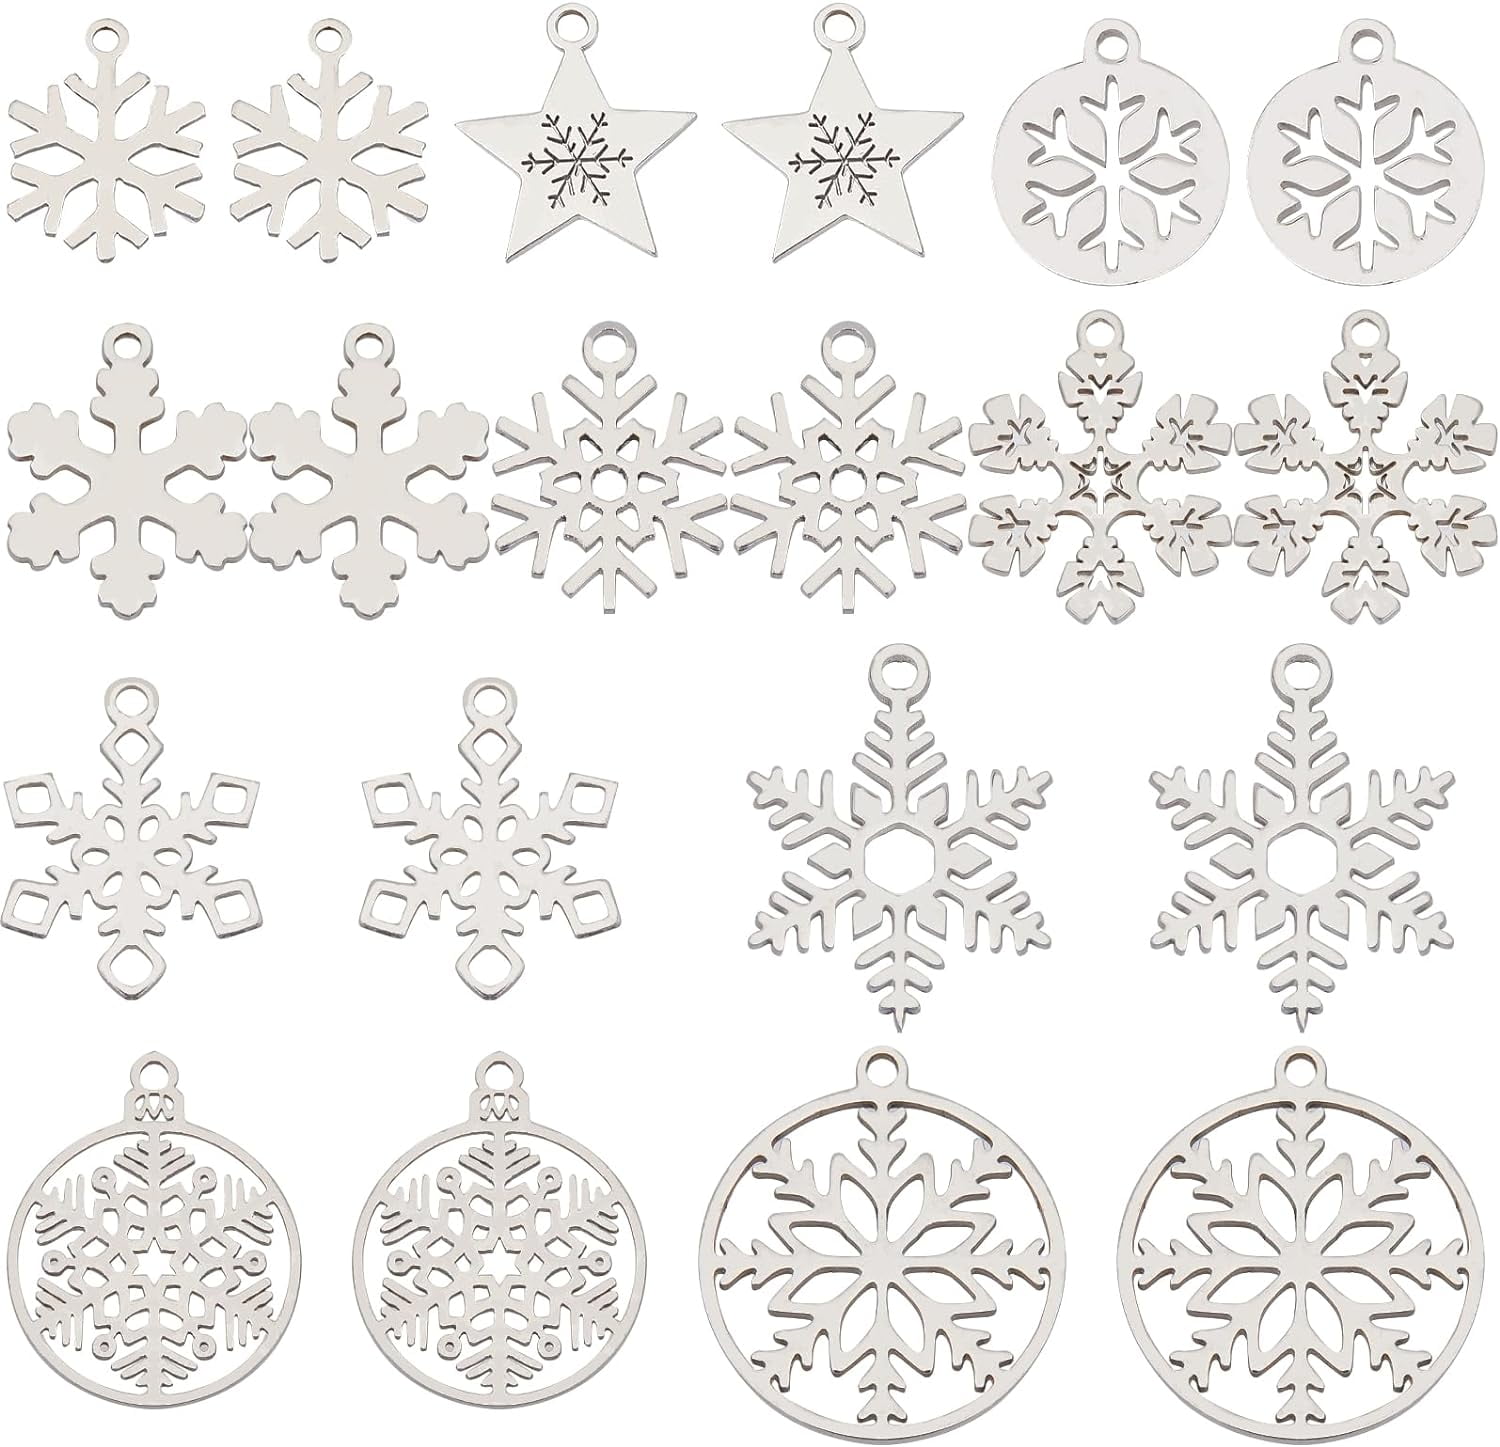 DICOSMETIC 16pcs 2 Colors Snowflake Charms Pendants Stainless Steel Gold Color Christmas Snowflake Charms DIY Jewelry Making